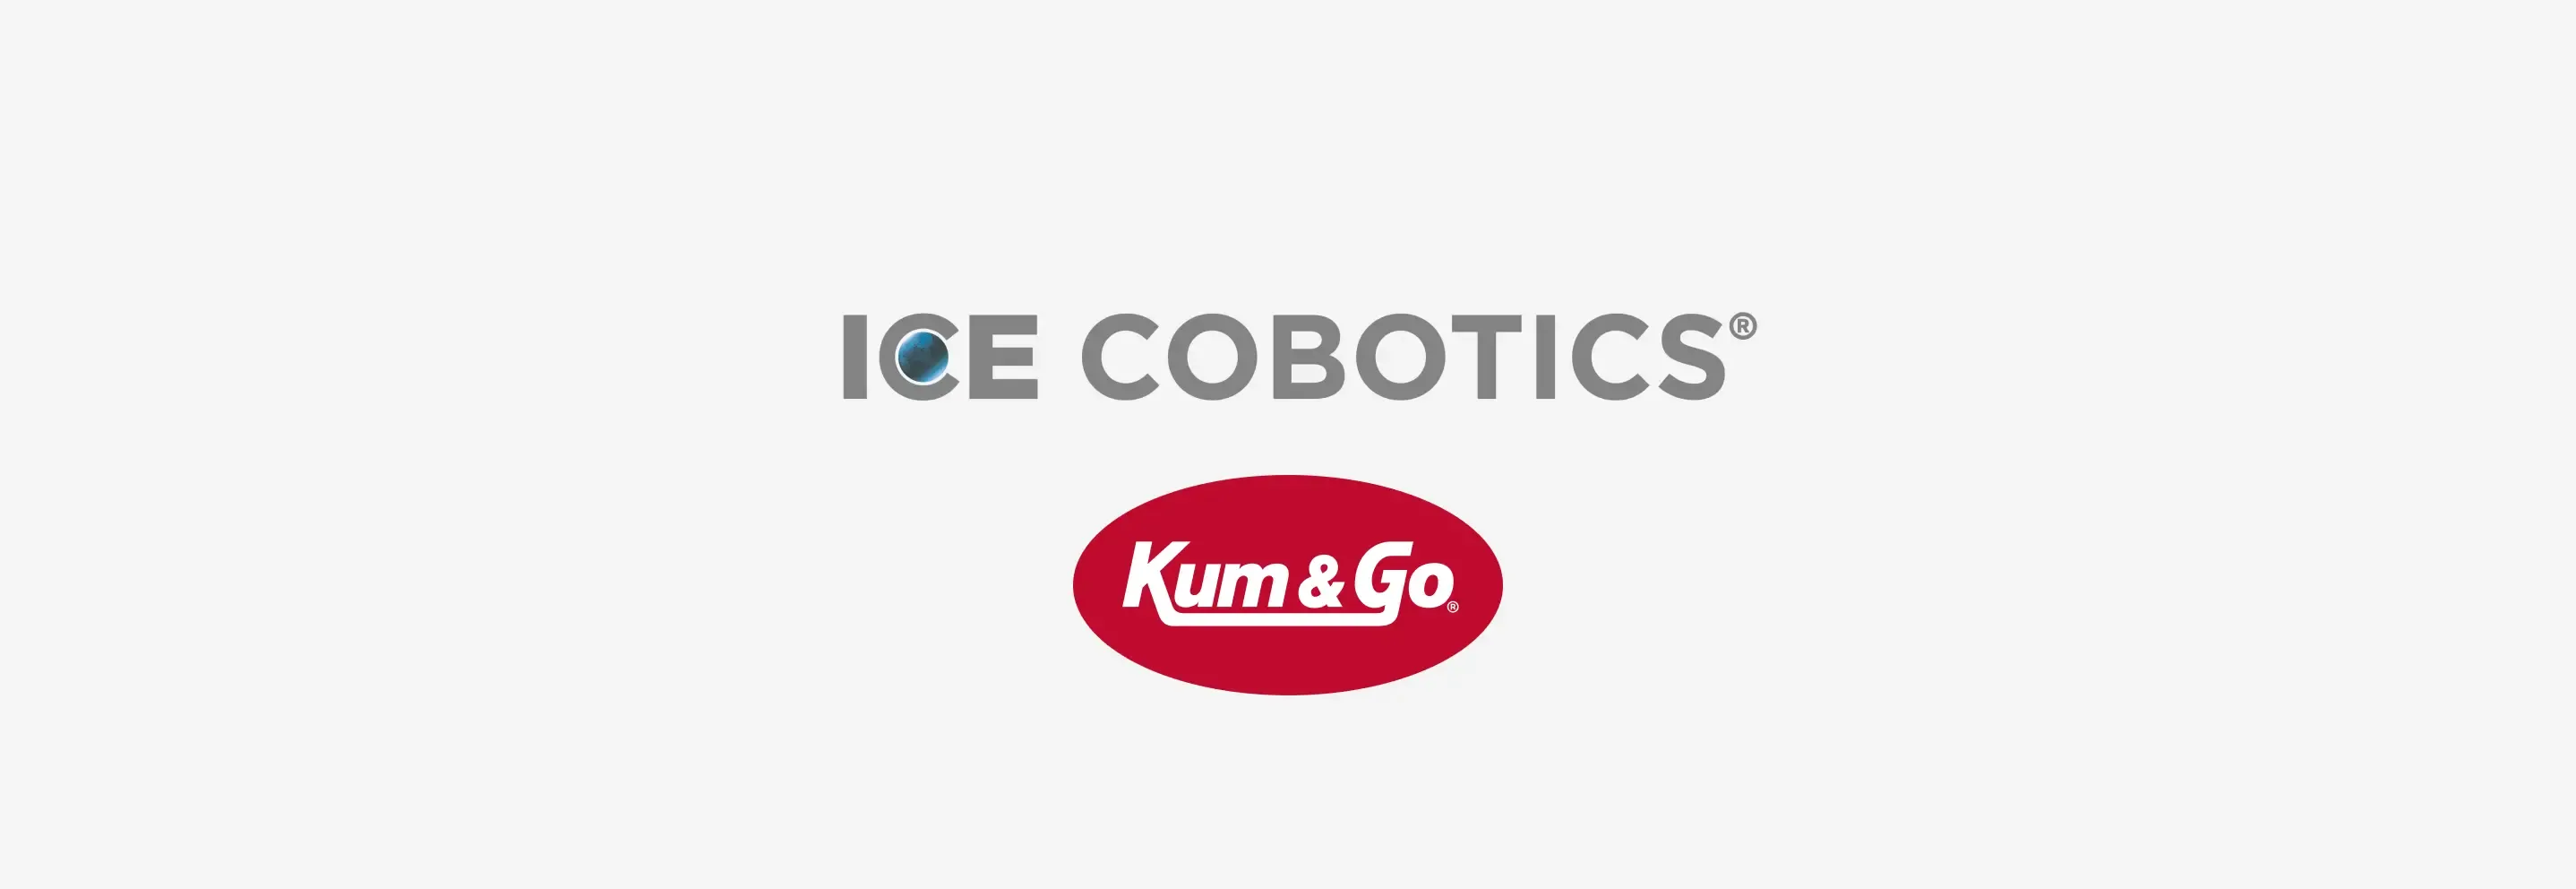 Kum & Go partners with ICE Cobotics to elevate customer experience and in-store operations